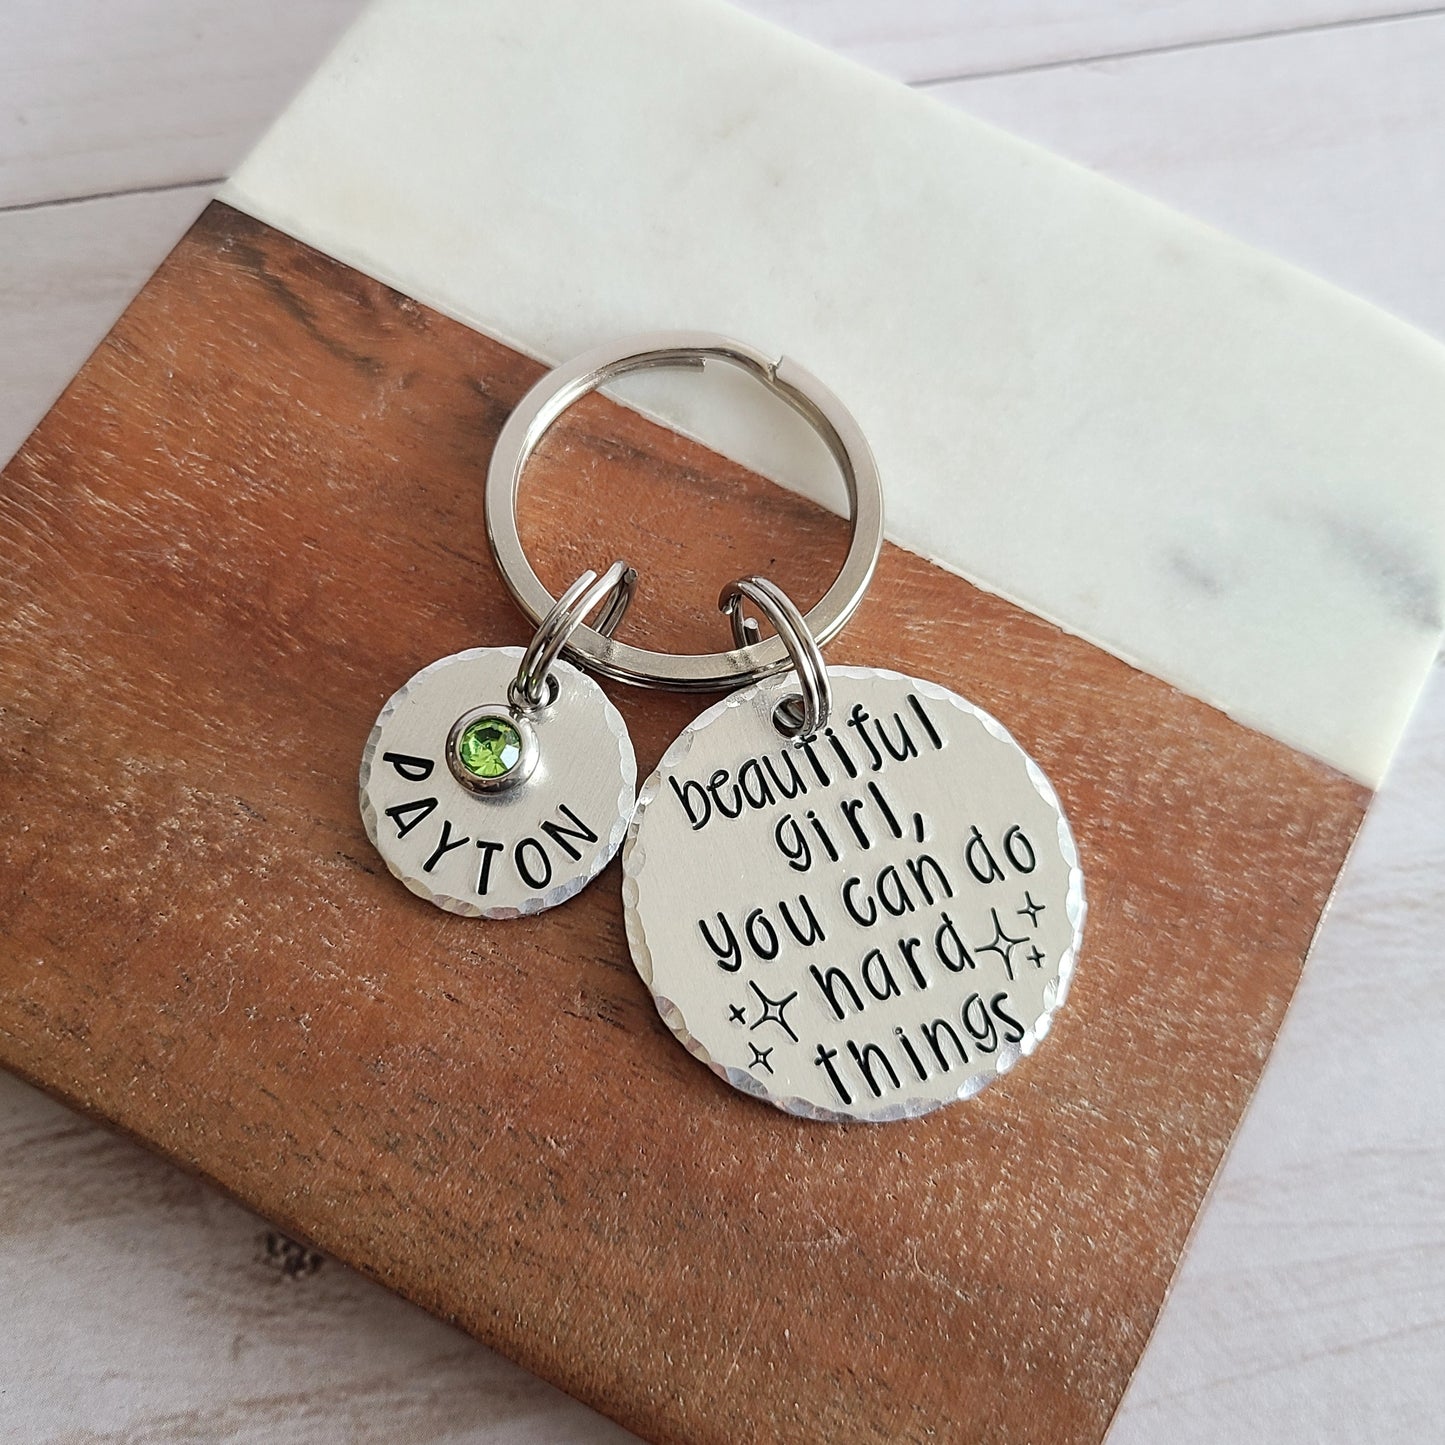 Beautiful Girl You Can Do Hard Things Personalized Keychain, Custom Key Chain Gifts for Teenage Girls, Empowering Women Gift, Graduation Gifts for Her